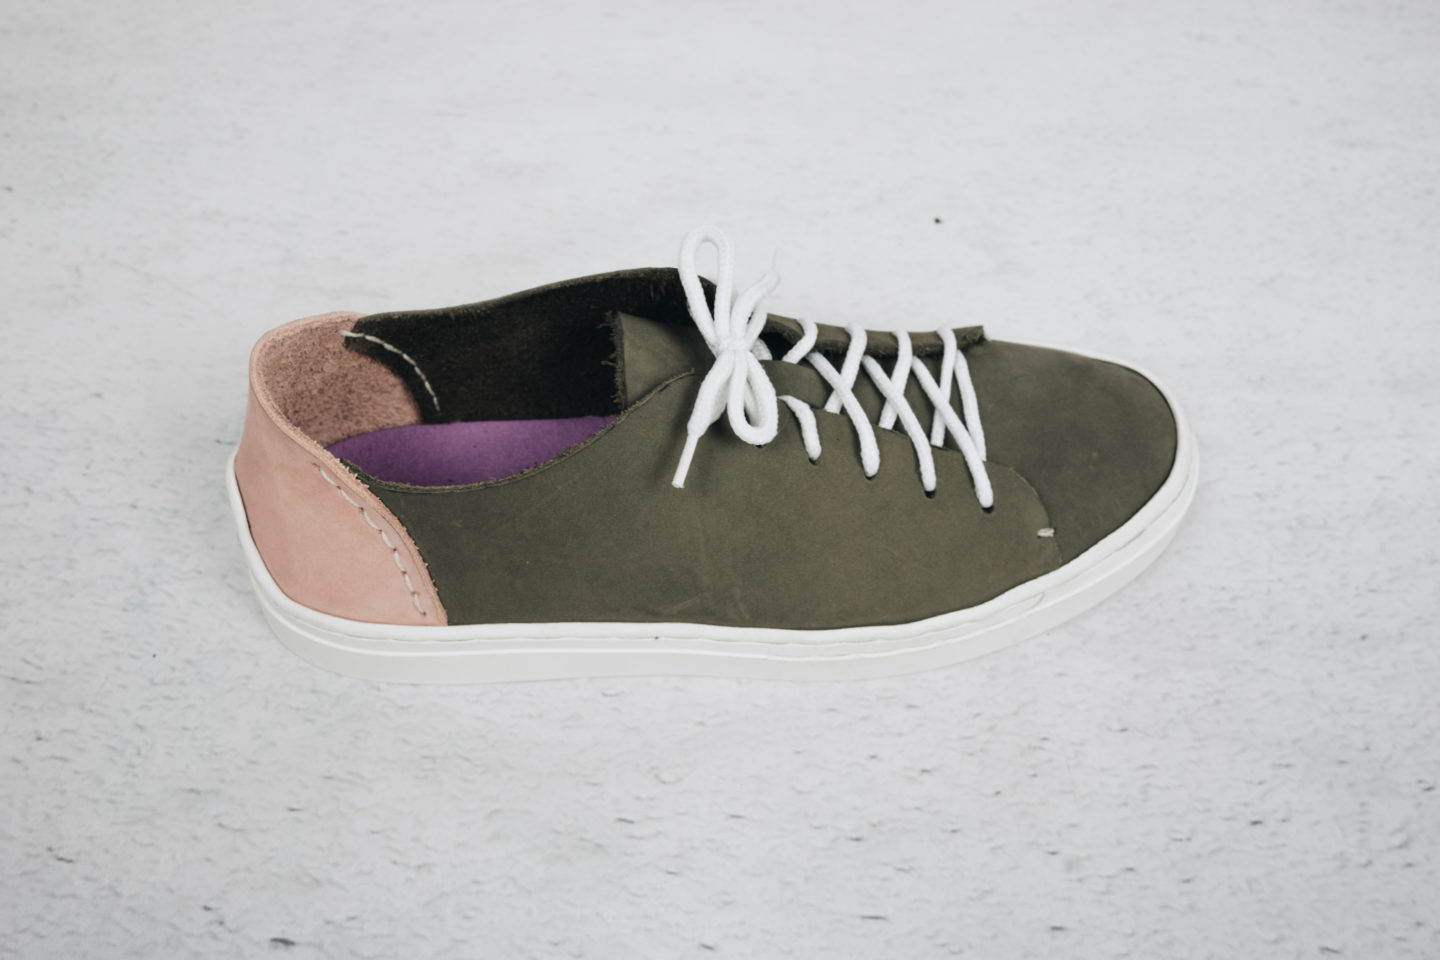 DIY Leather Trainers in grey and pink nubuck, using the Sneaker Kit new sole.
Handmade | Sewing | Crafting